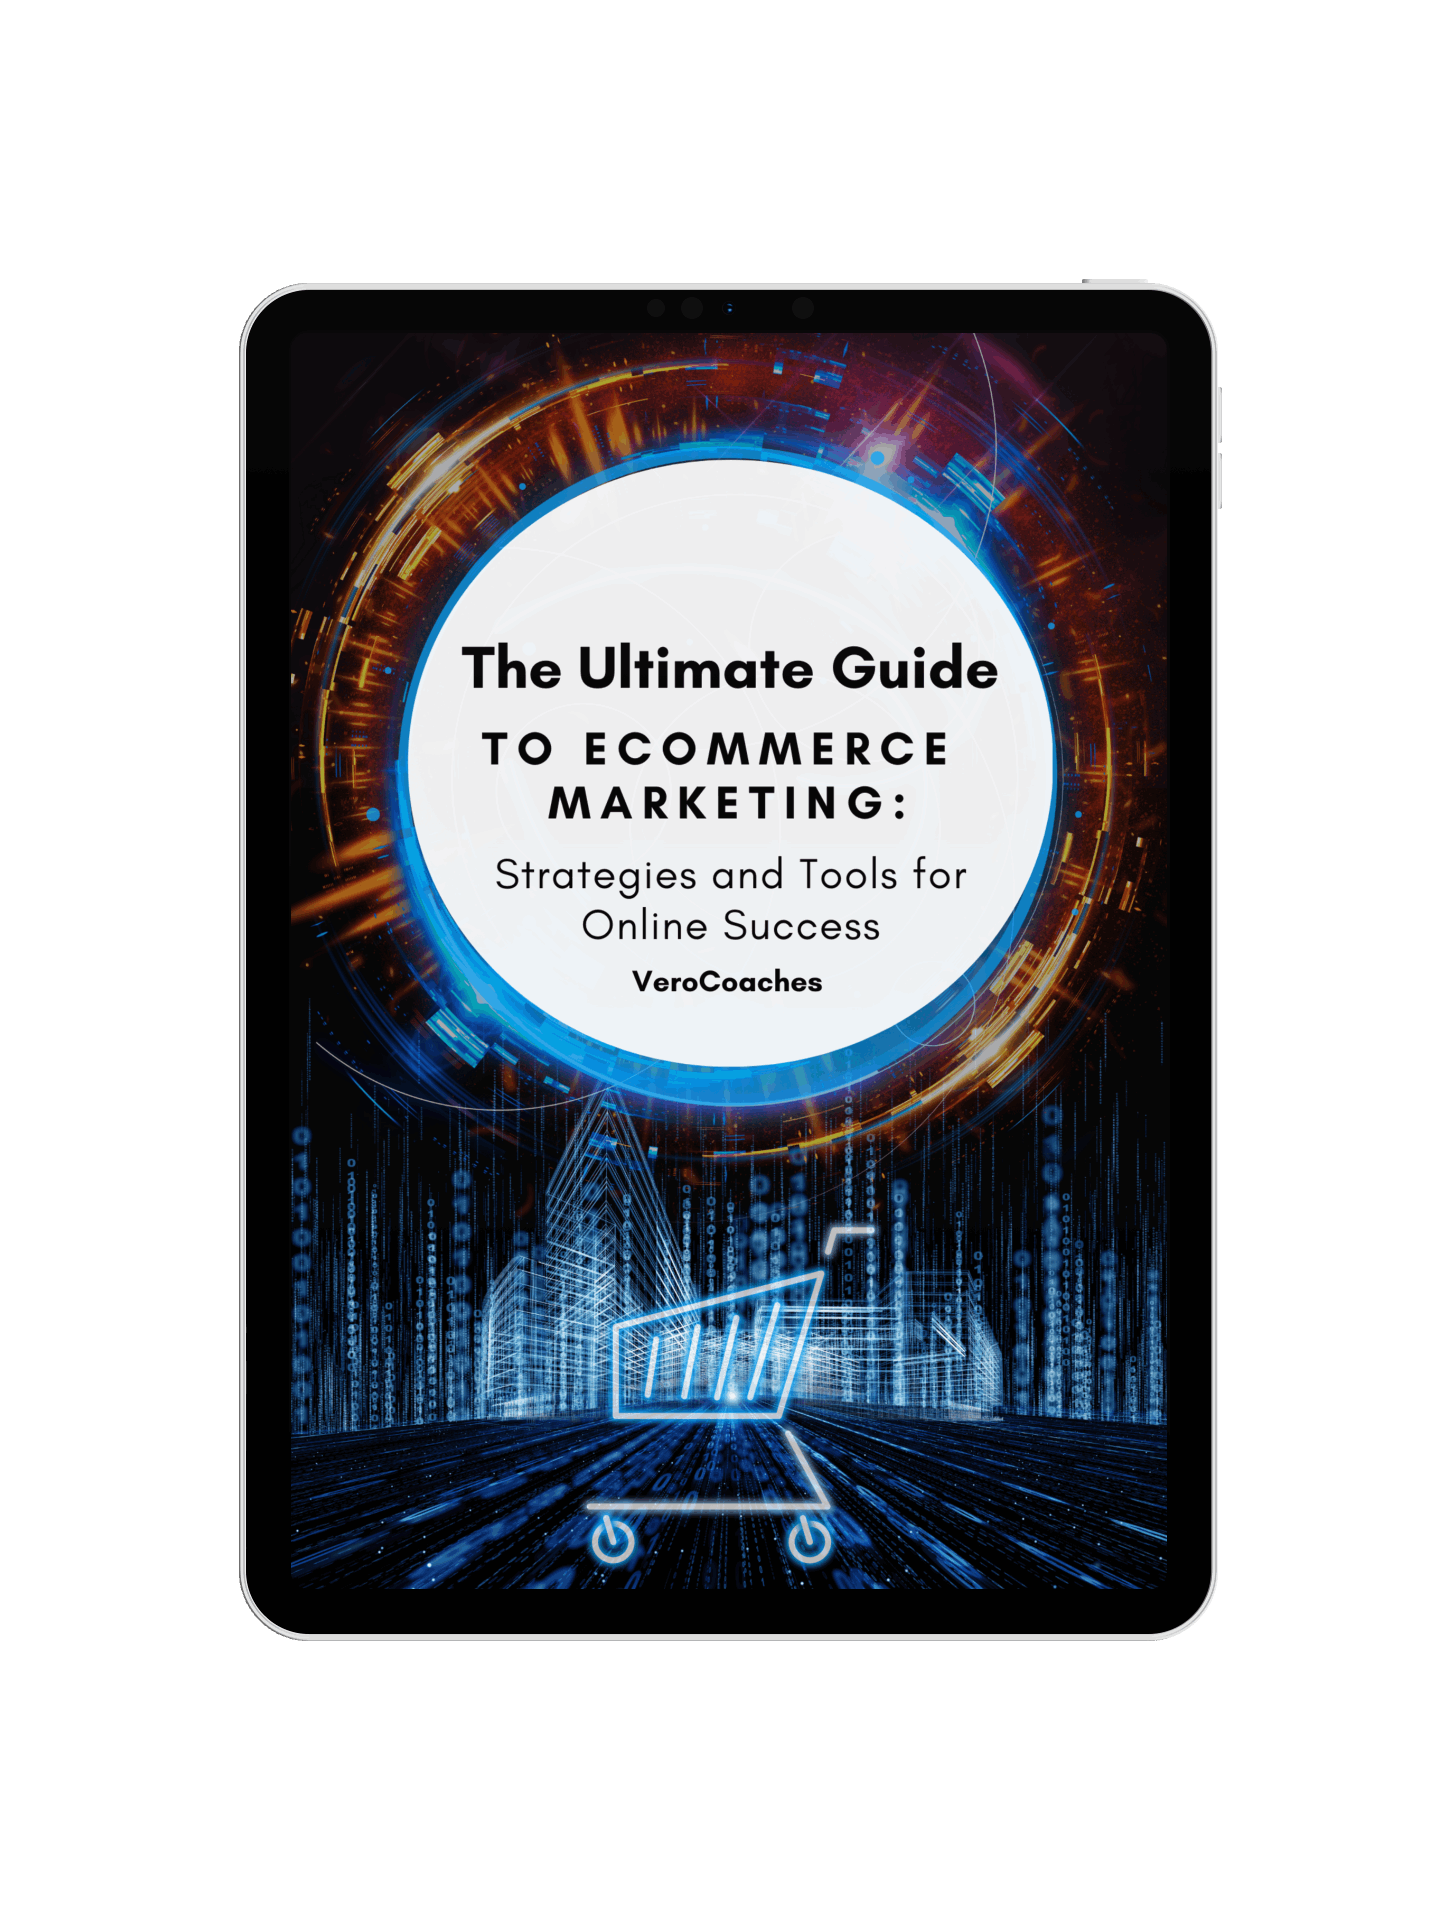 Cover of 'The Ultimate Guide to E-commerce Marketing' featuring key strategies and tools in tablet look.